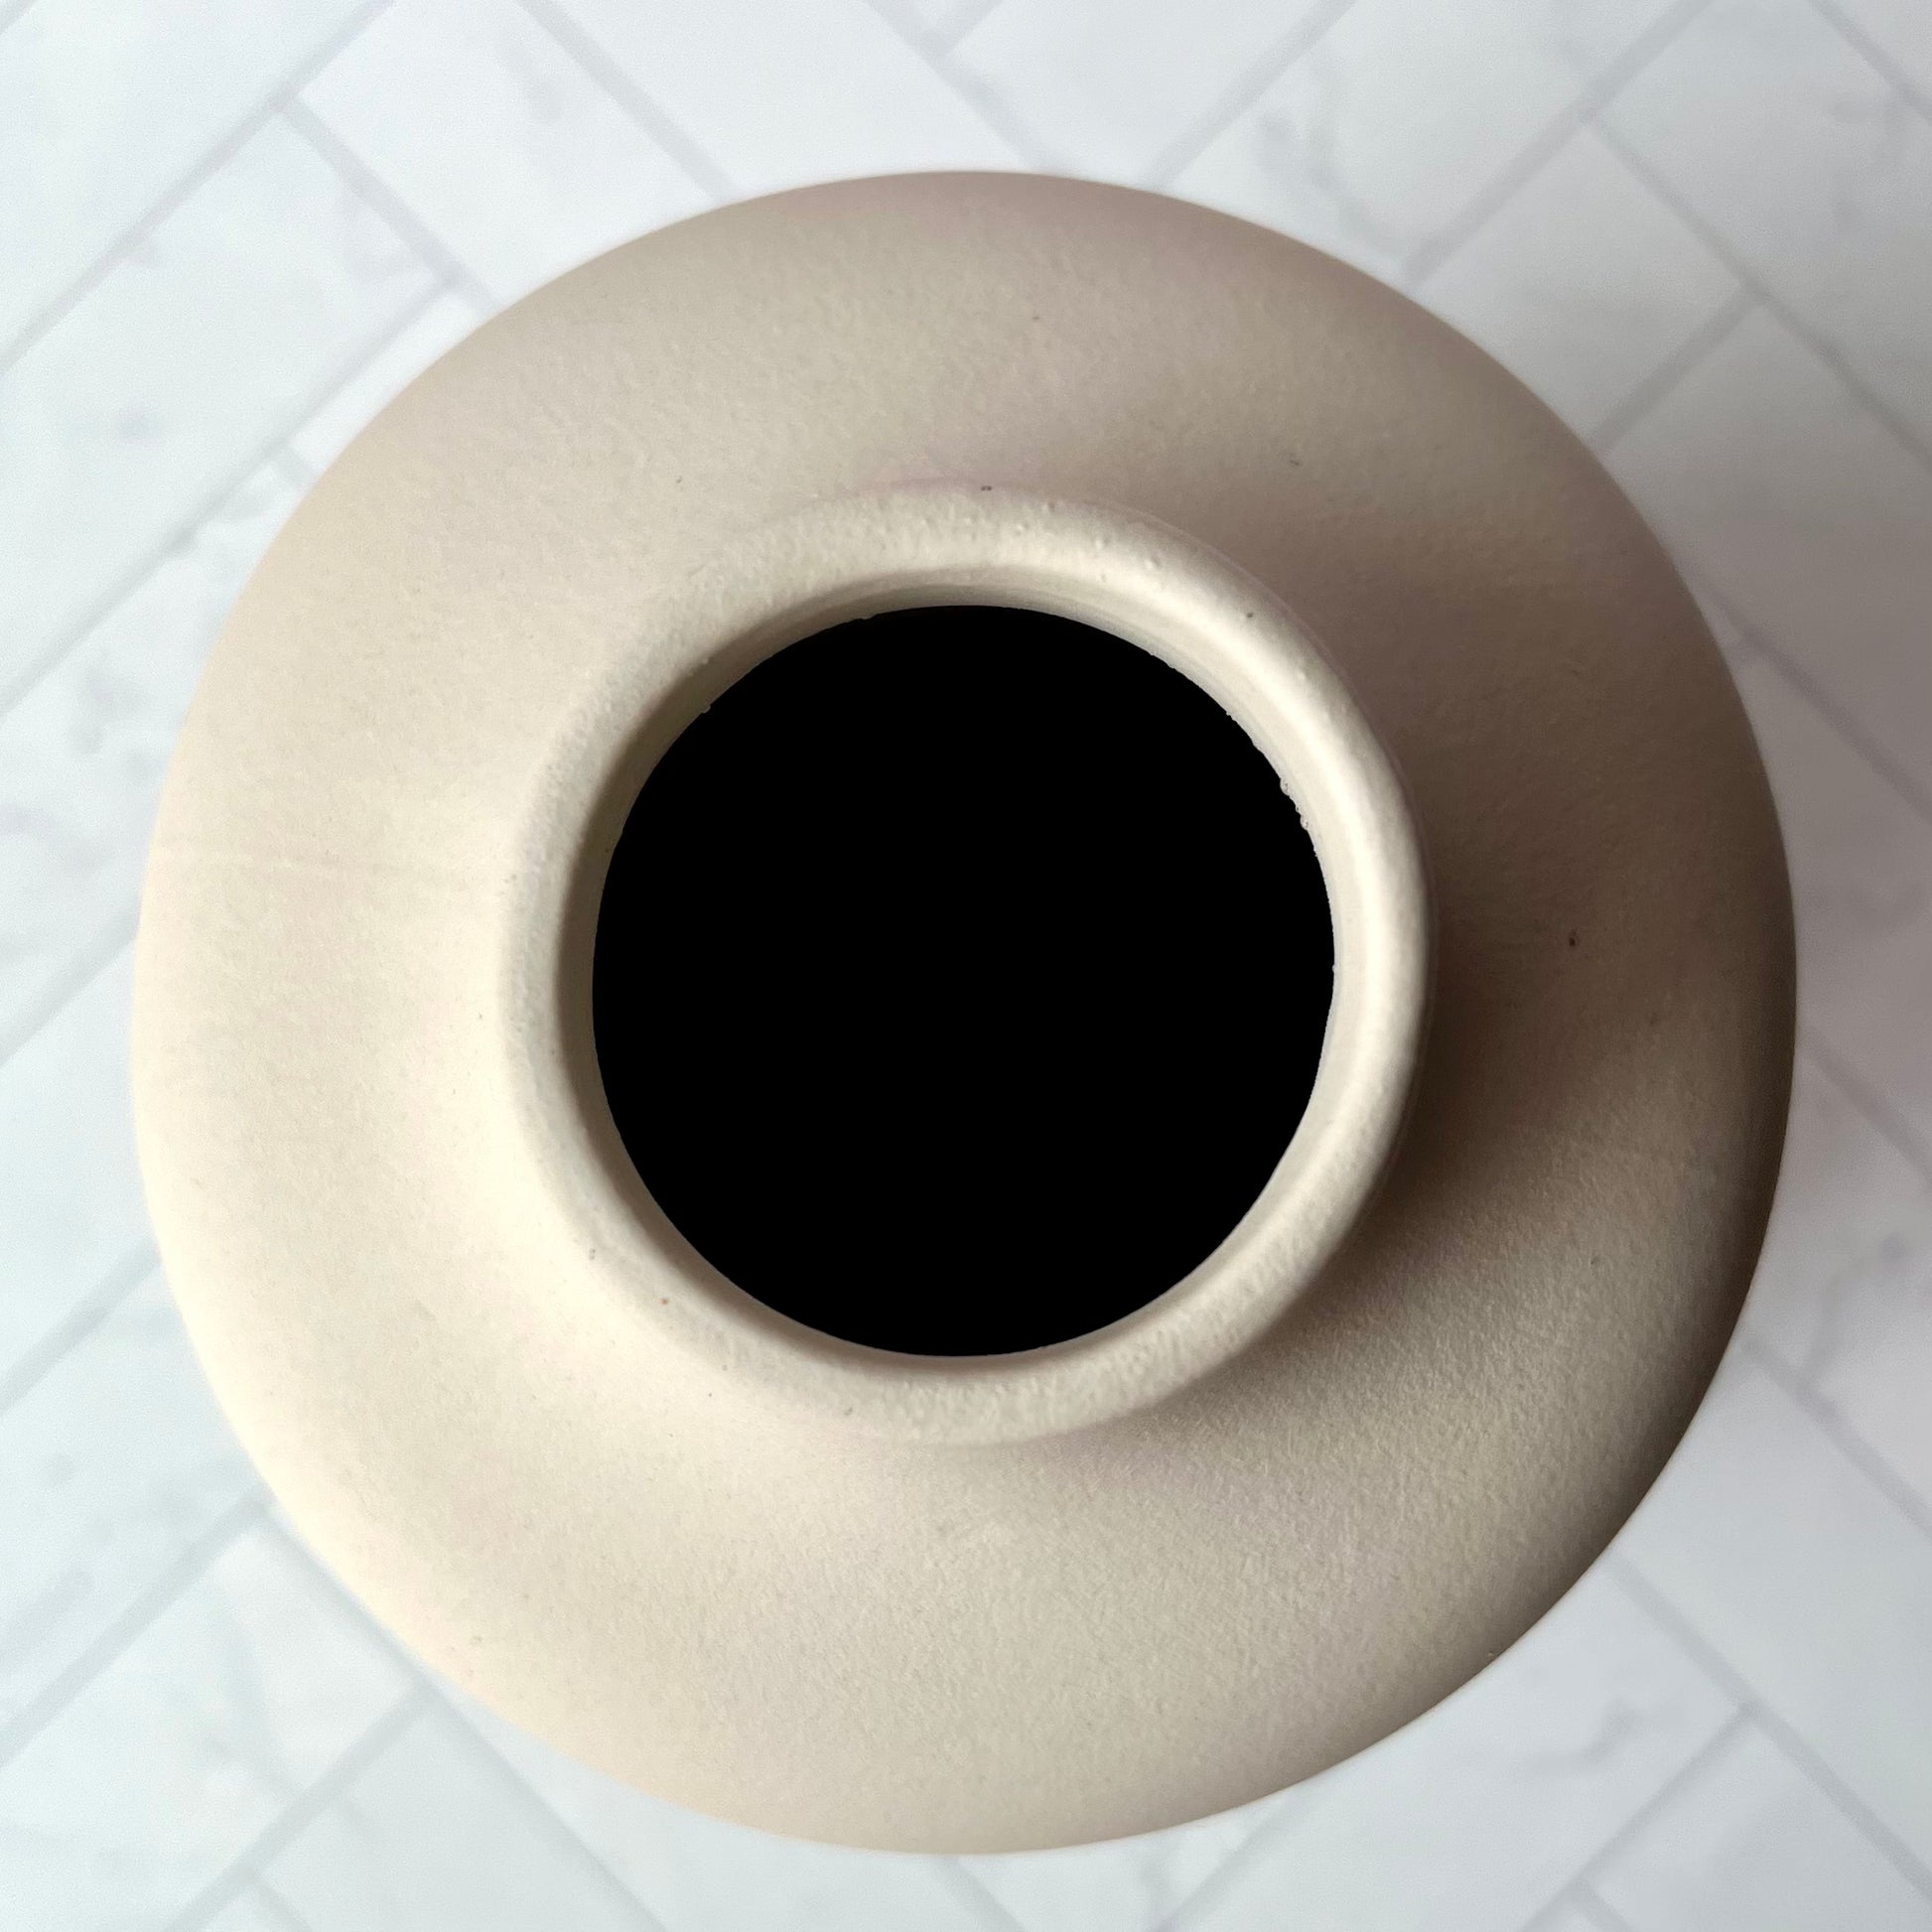 The Curvy White Vase shown from overhead, showing the size of its top opening